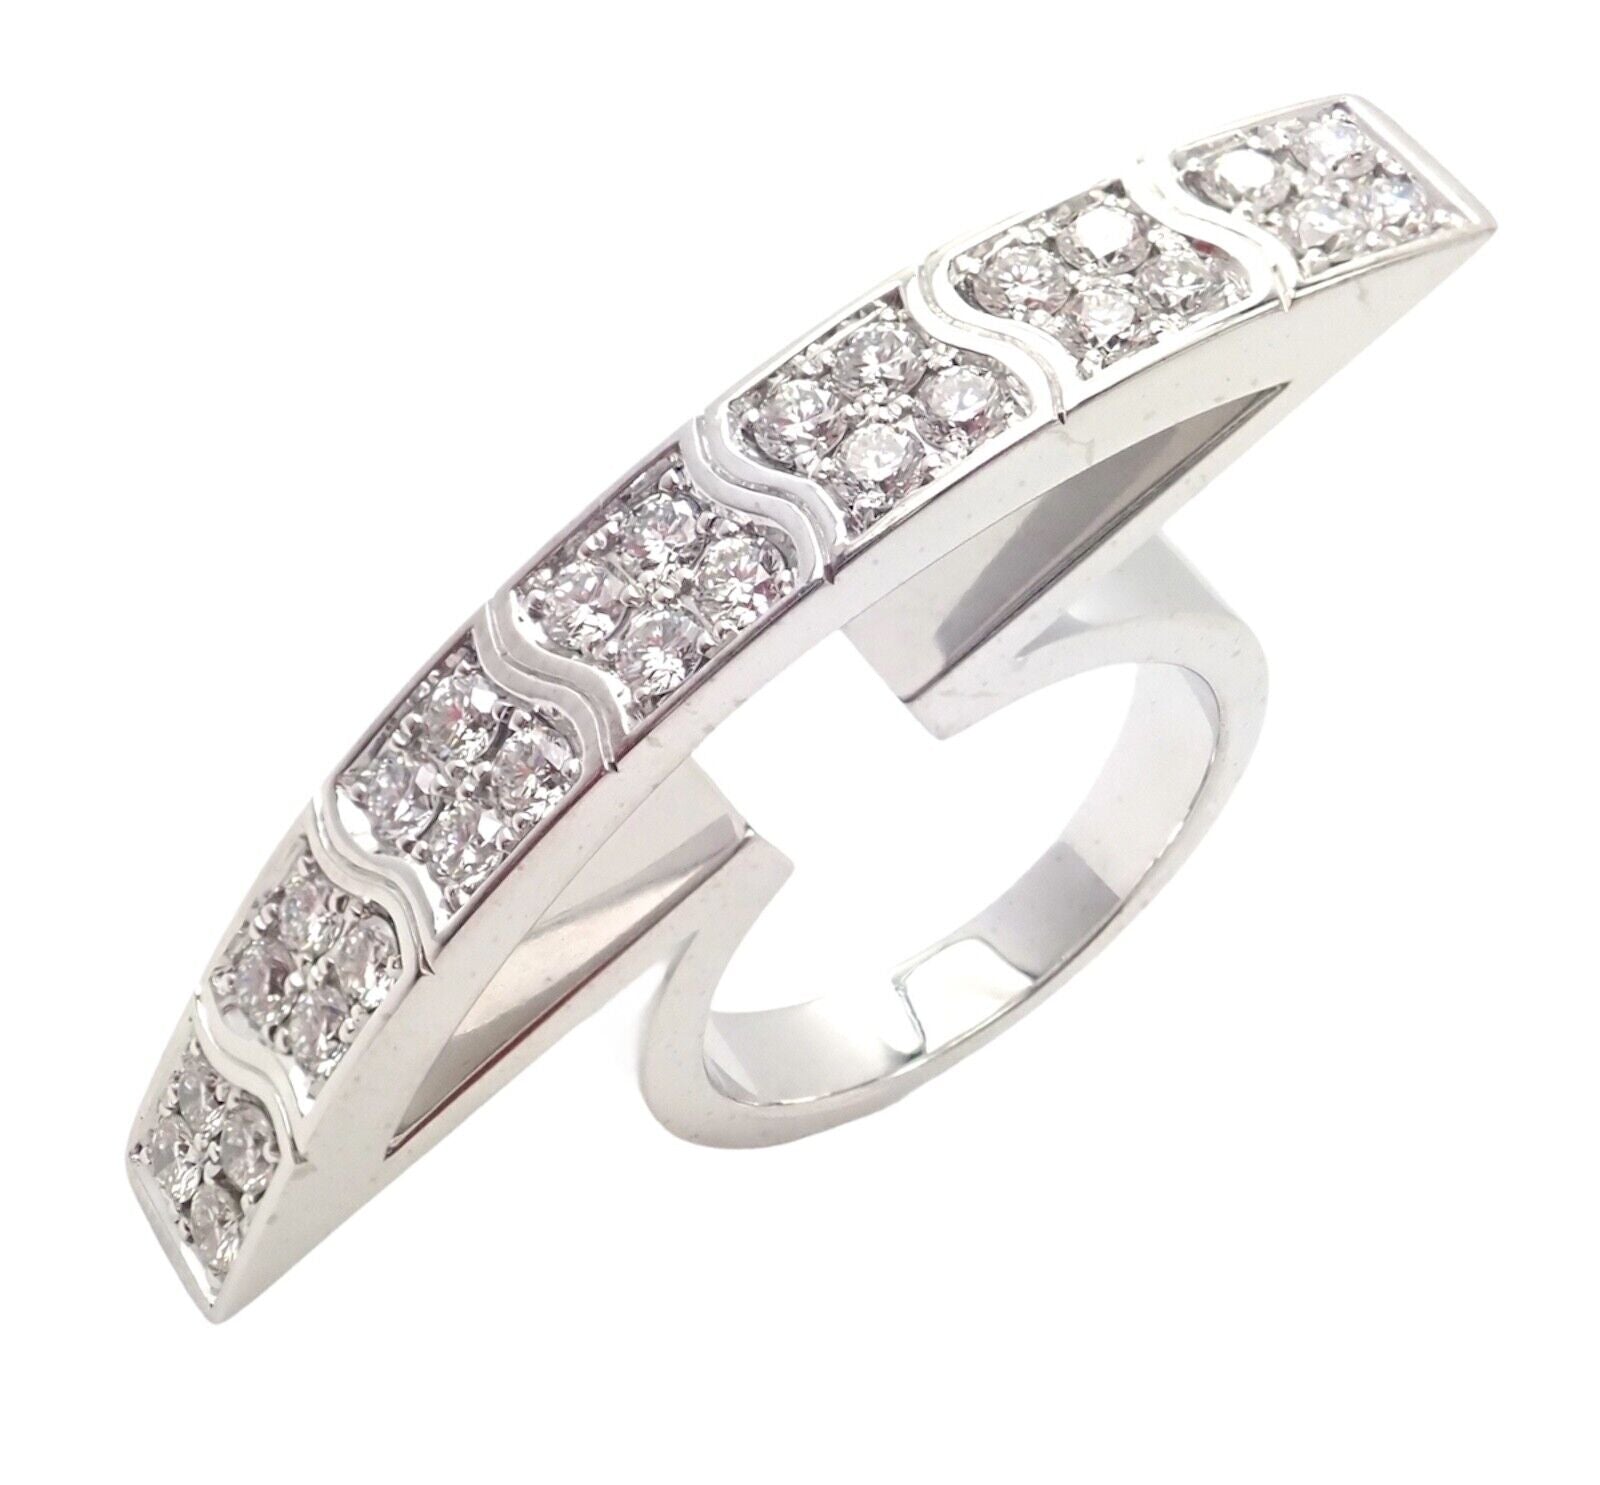 Piaget Jewelry & Watches:Fine Jewelry:Rings Authentic! Piaget 18k White Gold Diamond Big Crest Edge Statement Ring sz 8